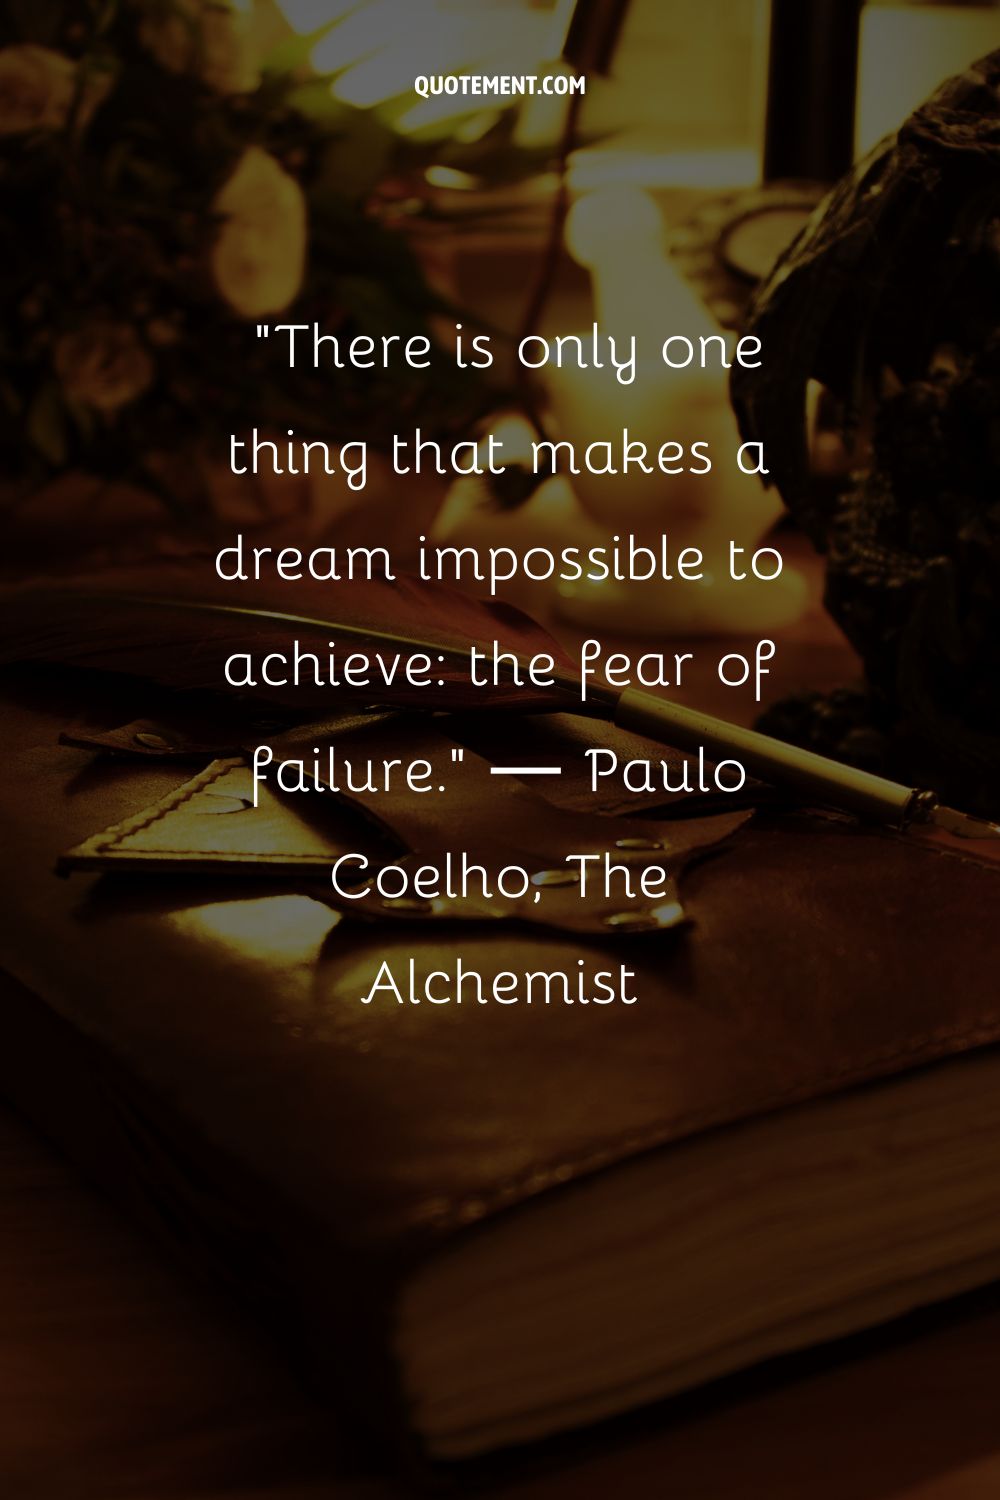 There is only one thing that makes a dream impossible to achieve the fear of failure